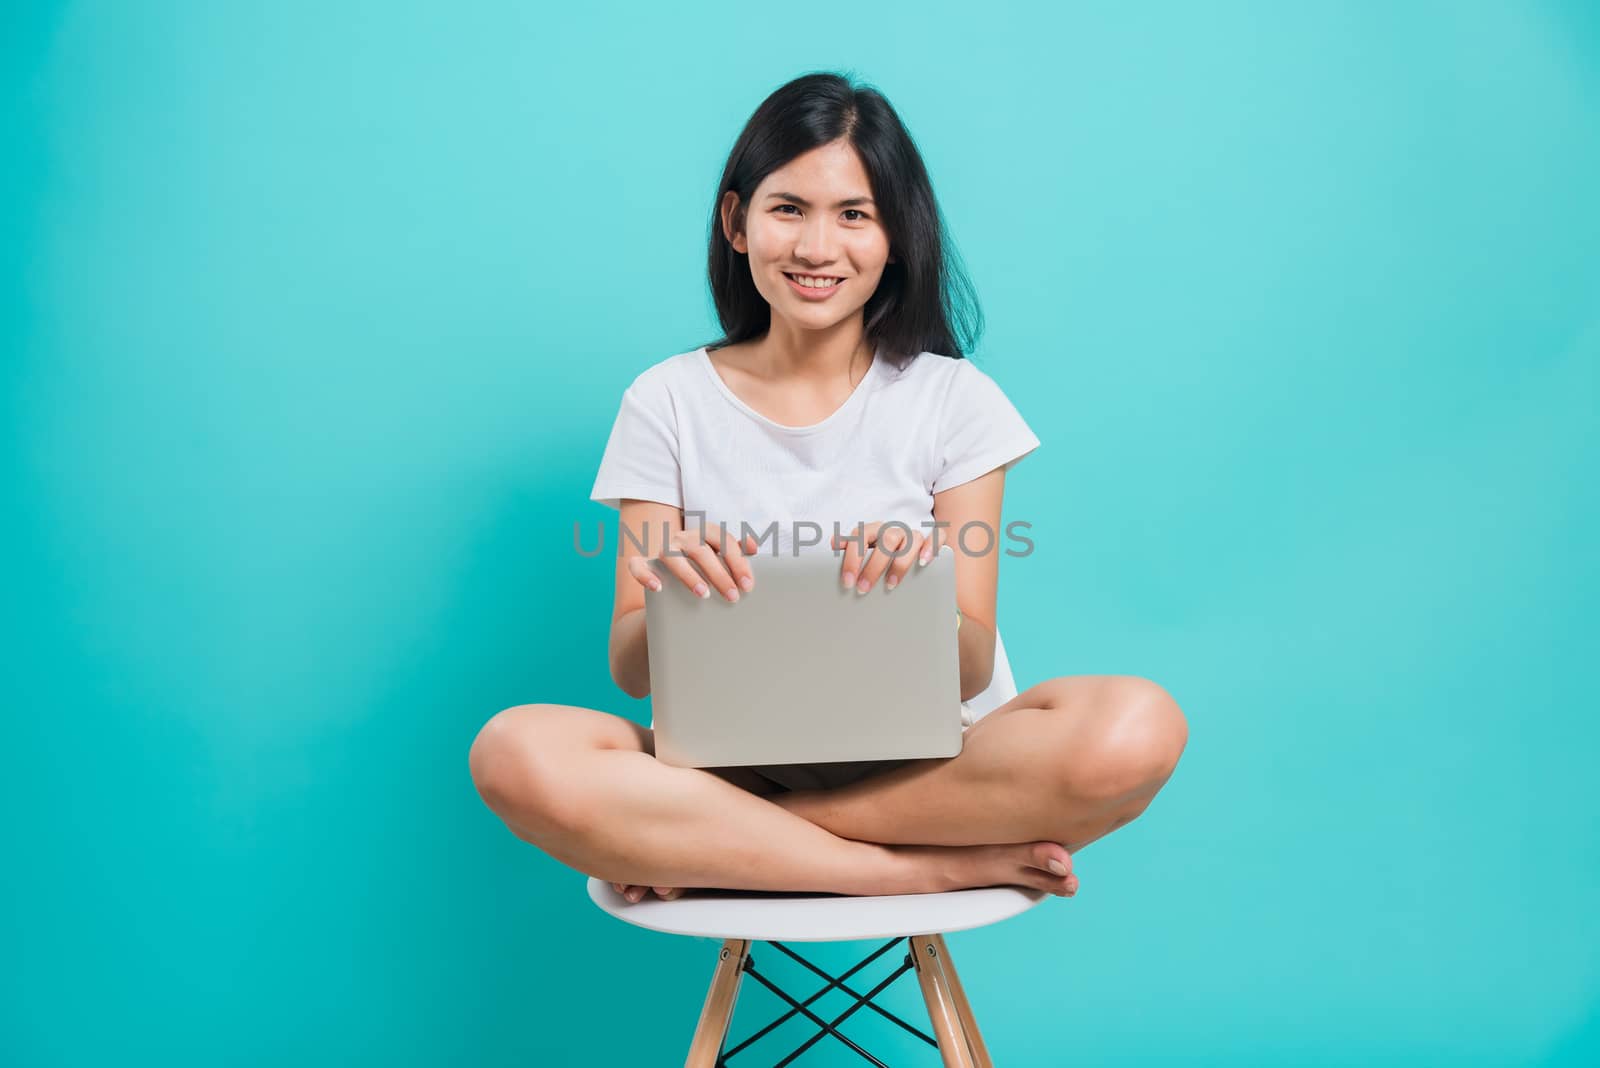 Portrait happy Asian beautiful young woman smile with teeth sitting on chair wear white t-shirt, She holding and using a laptop computer, studio shot on blue background with copy space for text